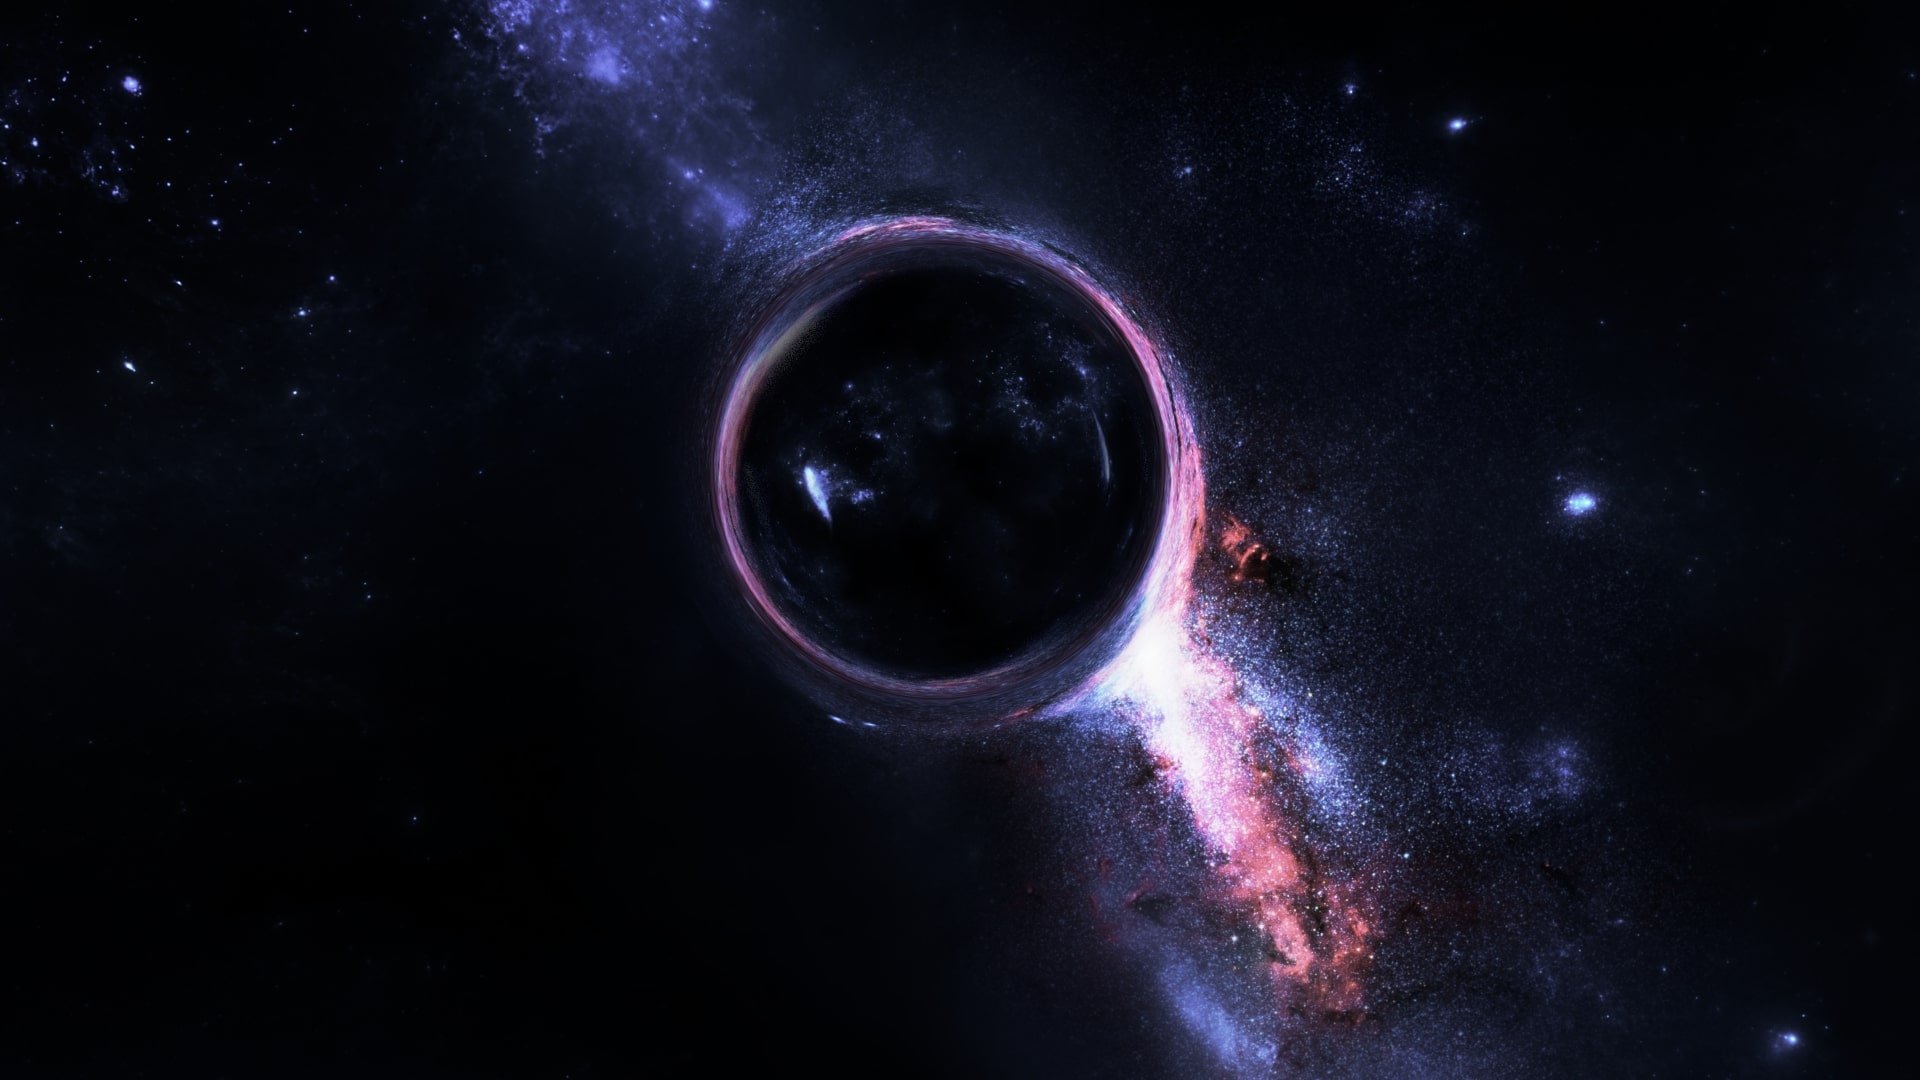 Wallpaper Of Black Hole, Space, Galaxy Background & - Space Wallpaper Black Hole - HD Wallpaper 